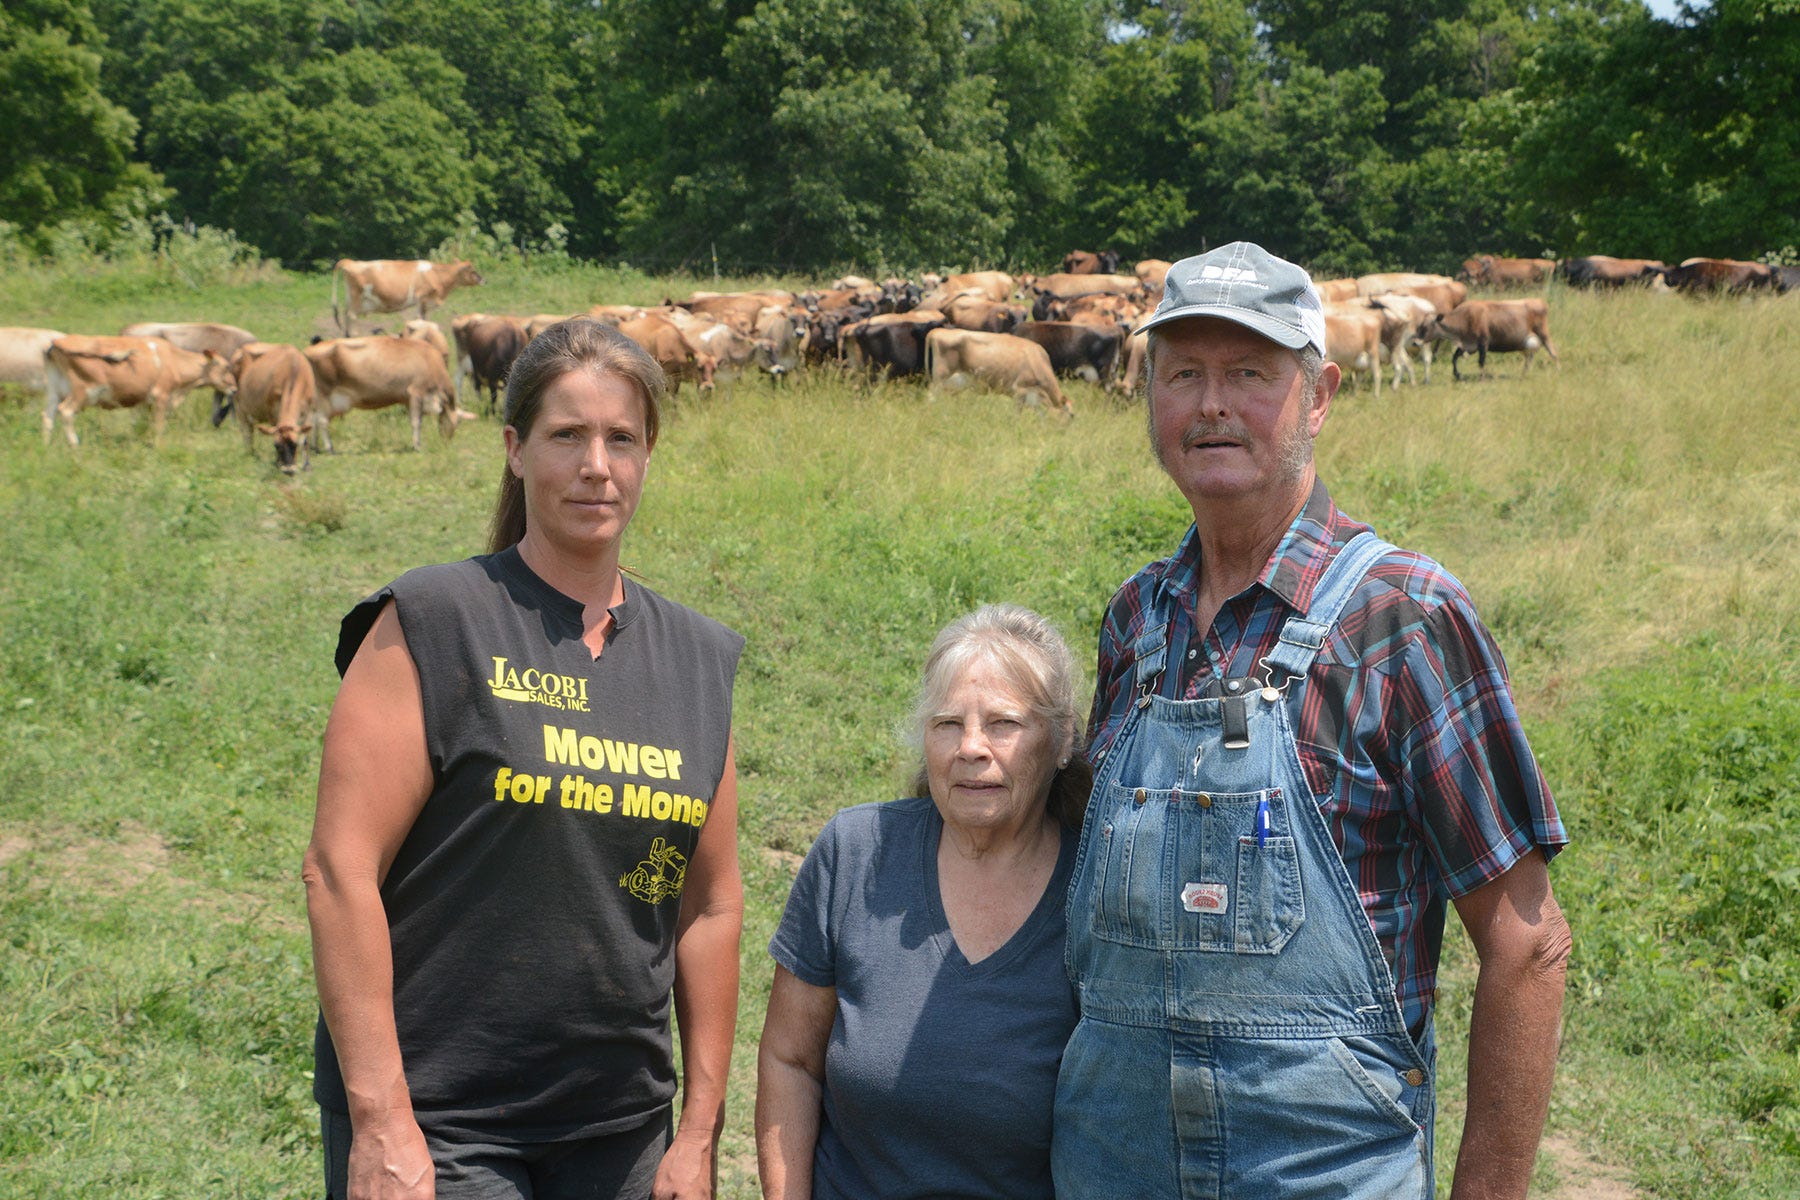 Sarah, Judy and Mike Ponsford stand in a pasture with a herd of Jersey cows behind them